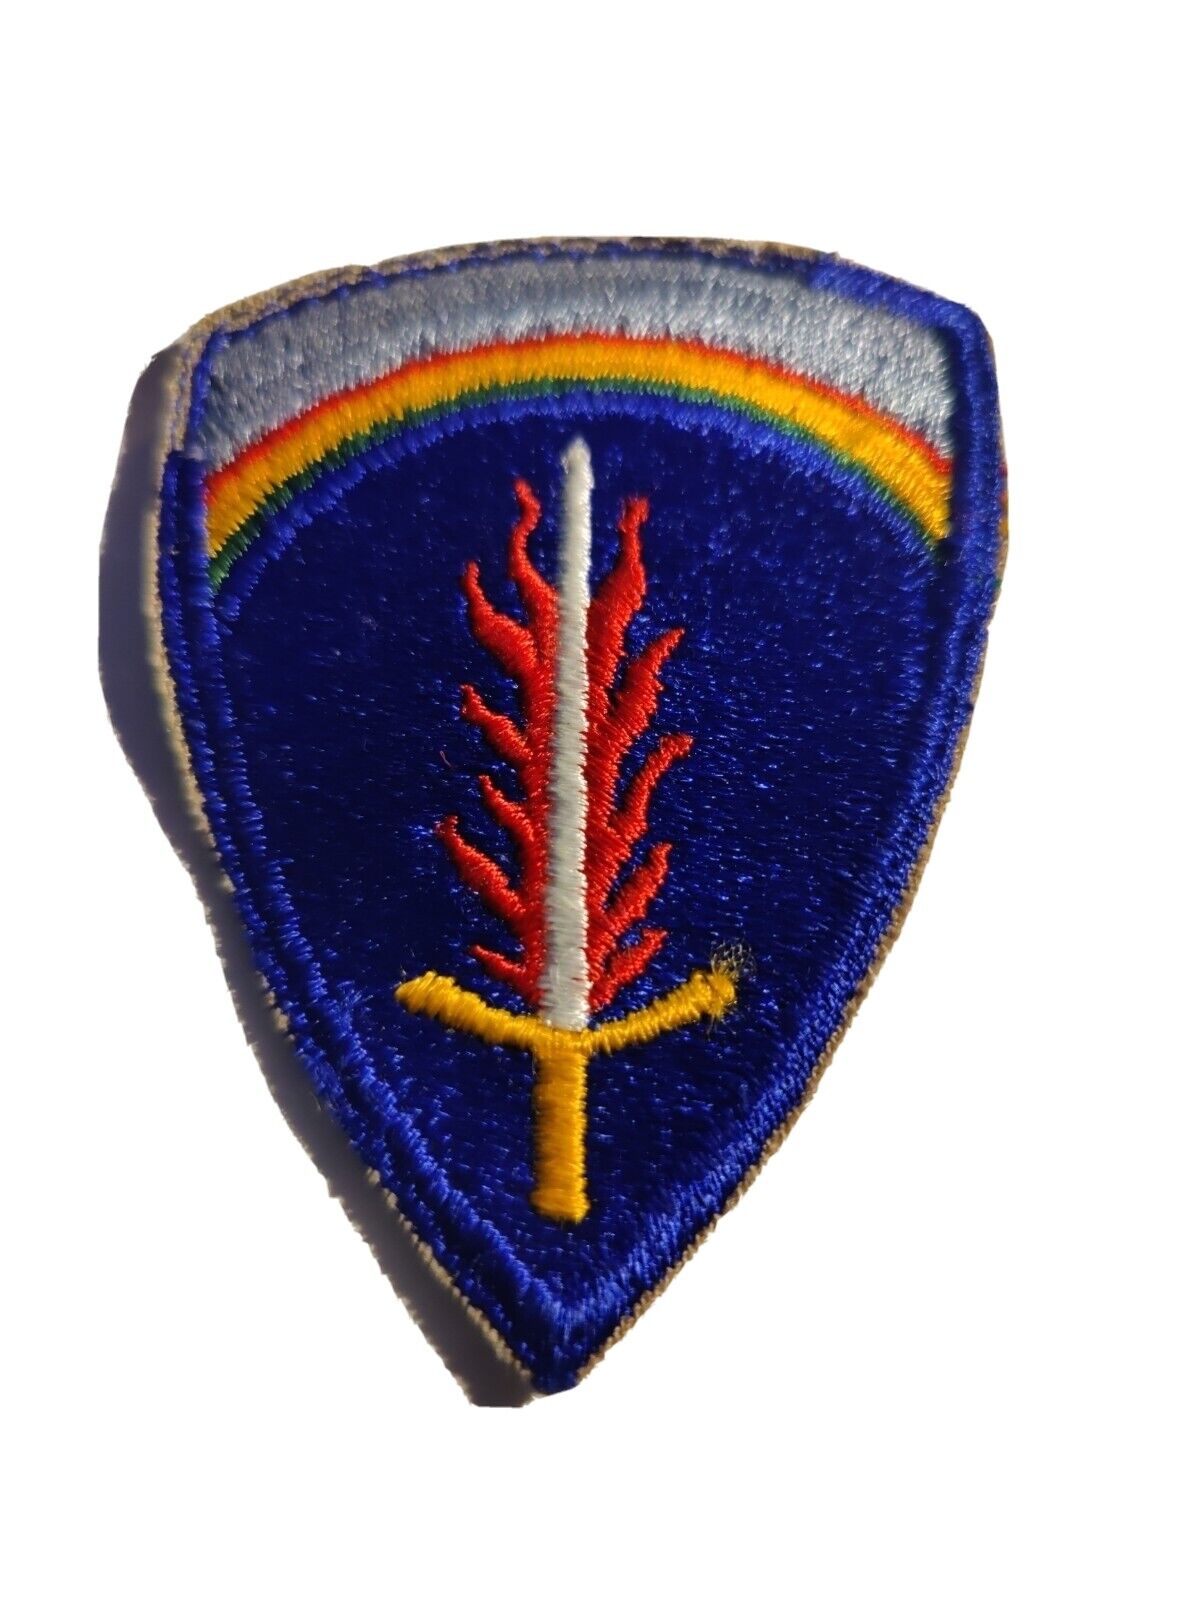 WW11 Rainbow Sword USAREUR Soldier Europe army patch